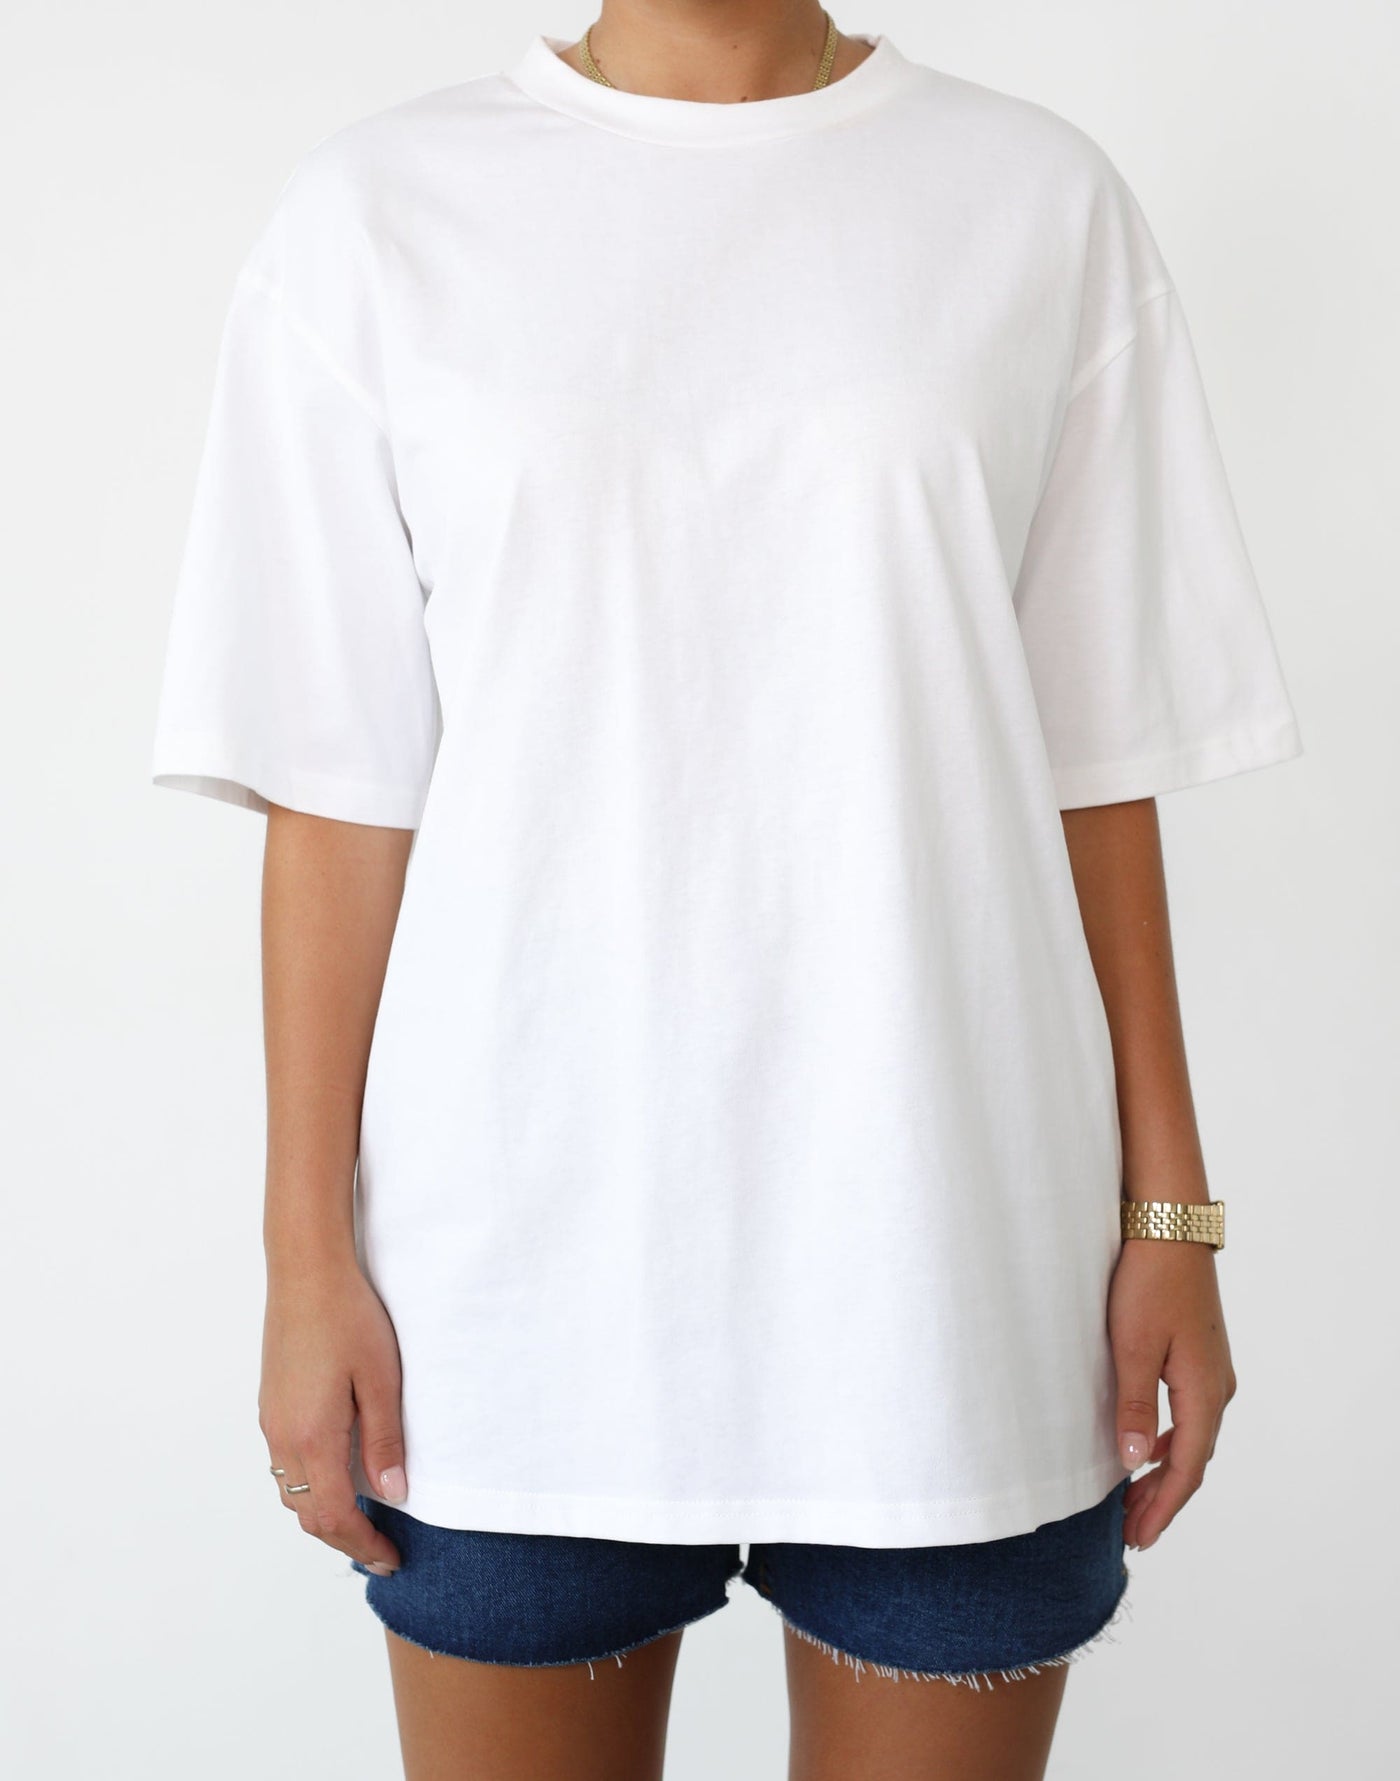 Luca Oversized Tee (White) - Relaxed Oversized T-Shirt - Women's Top - Charcoal Clothing